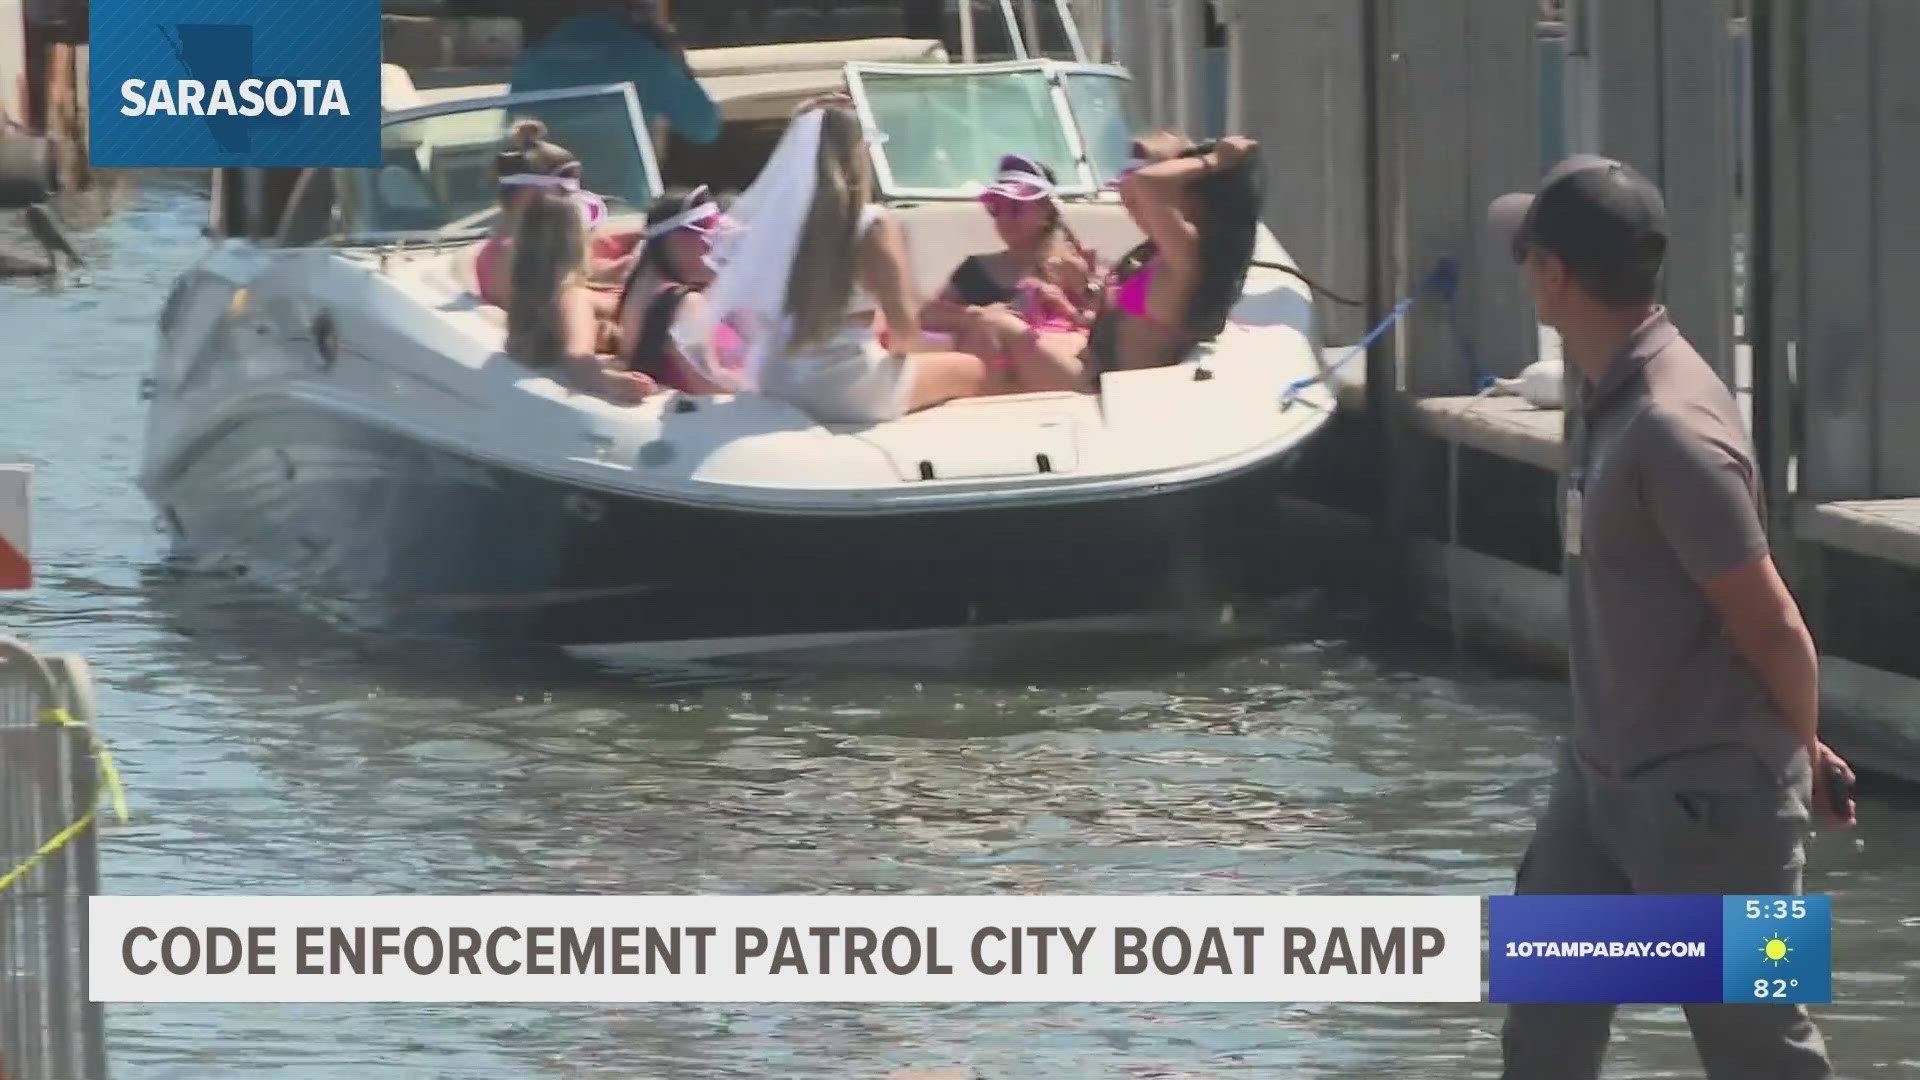 The city of Sarasota is now launching code enforcement patrols.